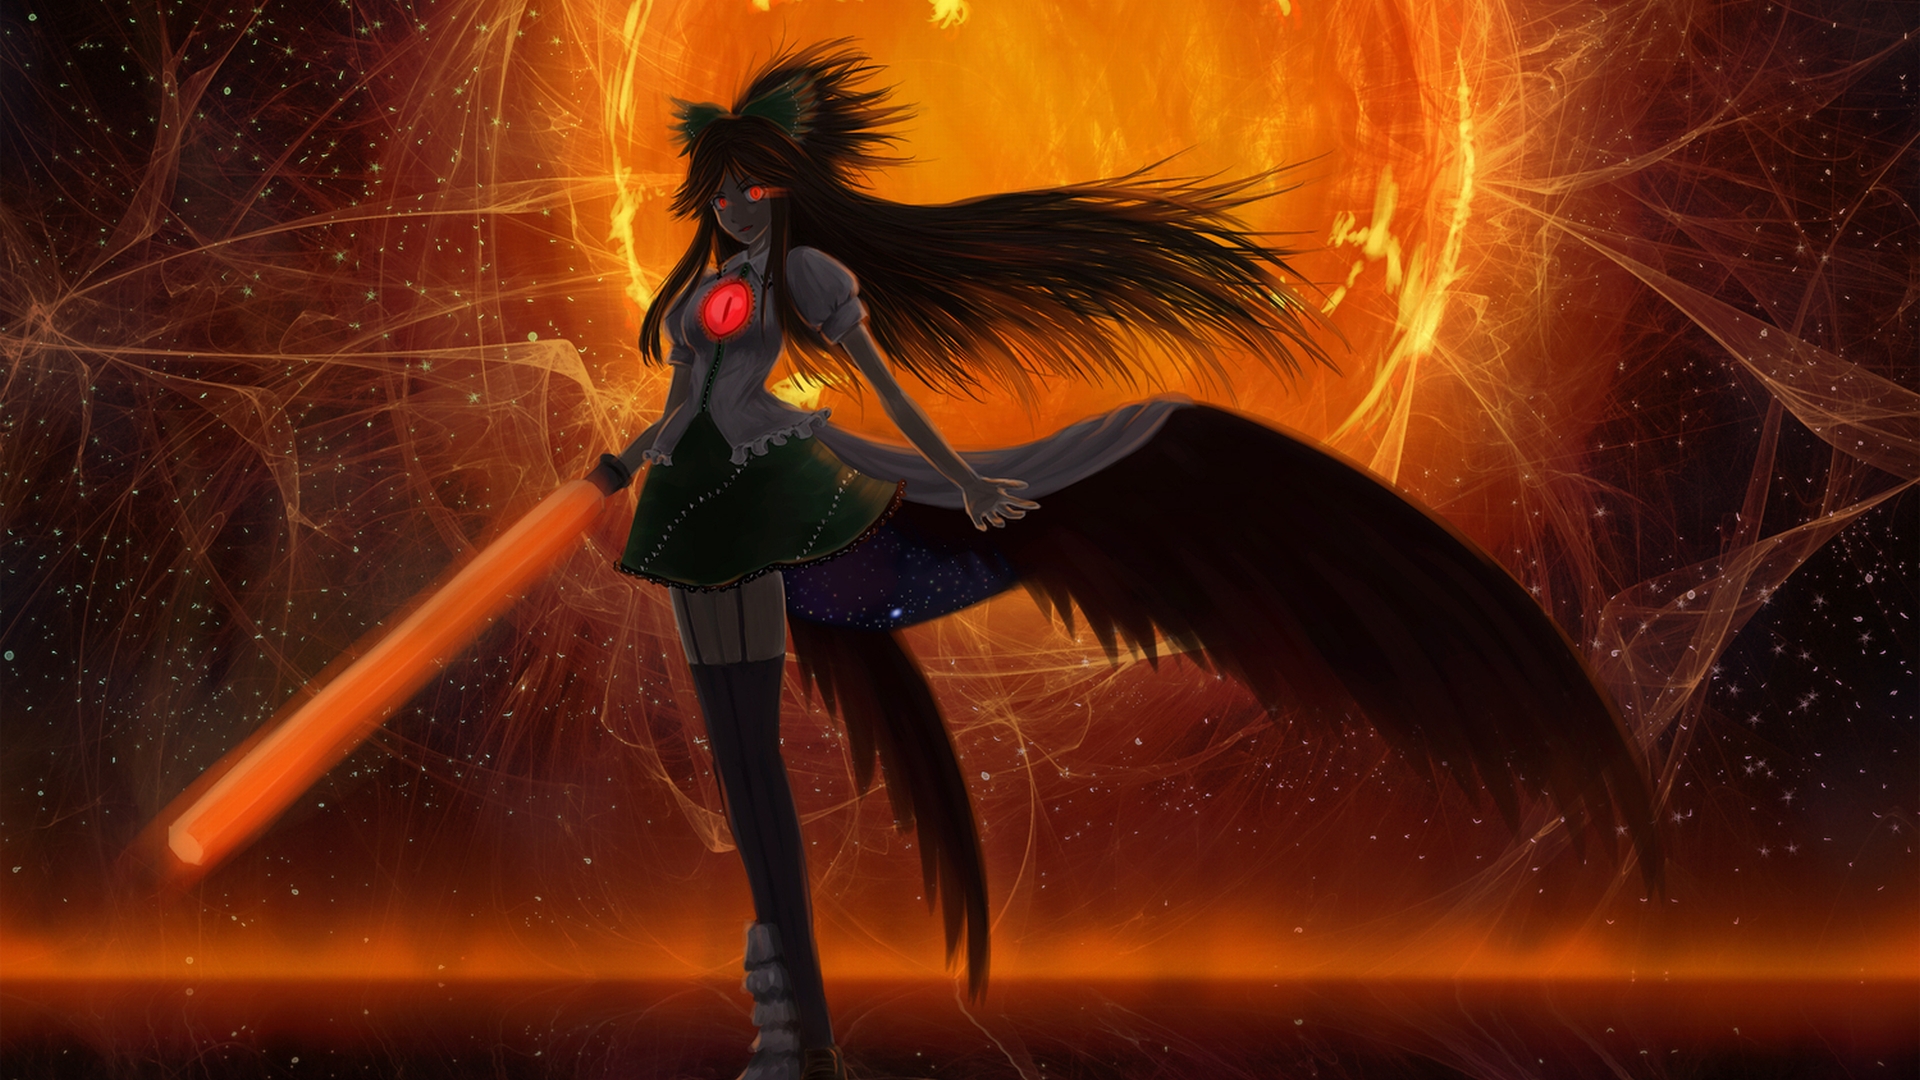 Utsuho Reiuji from the Touhou series, a captivating anime character, brightens up this desktop wallpaper.